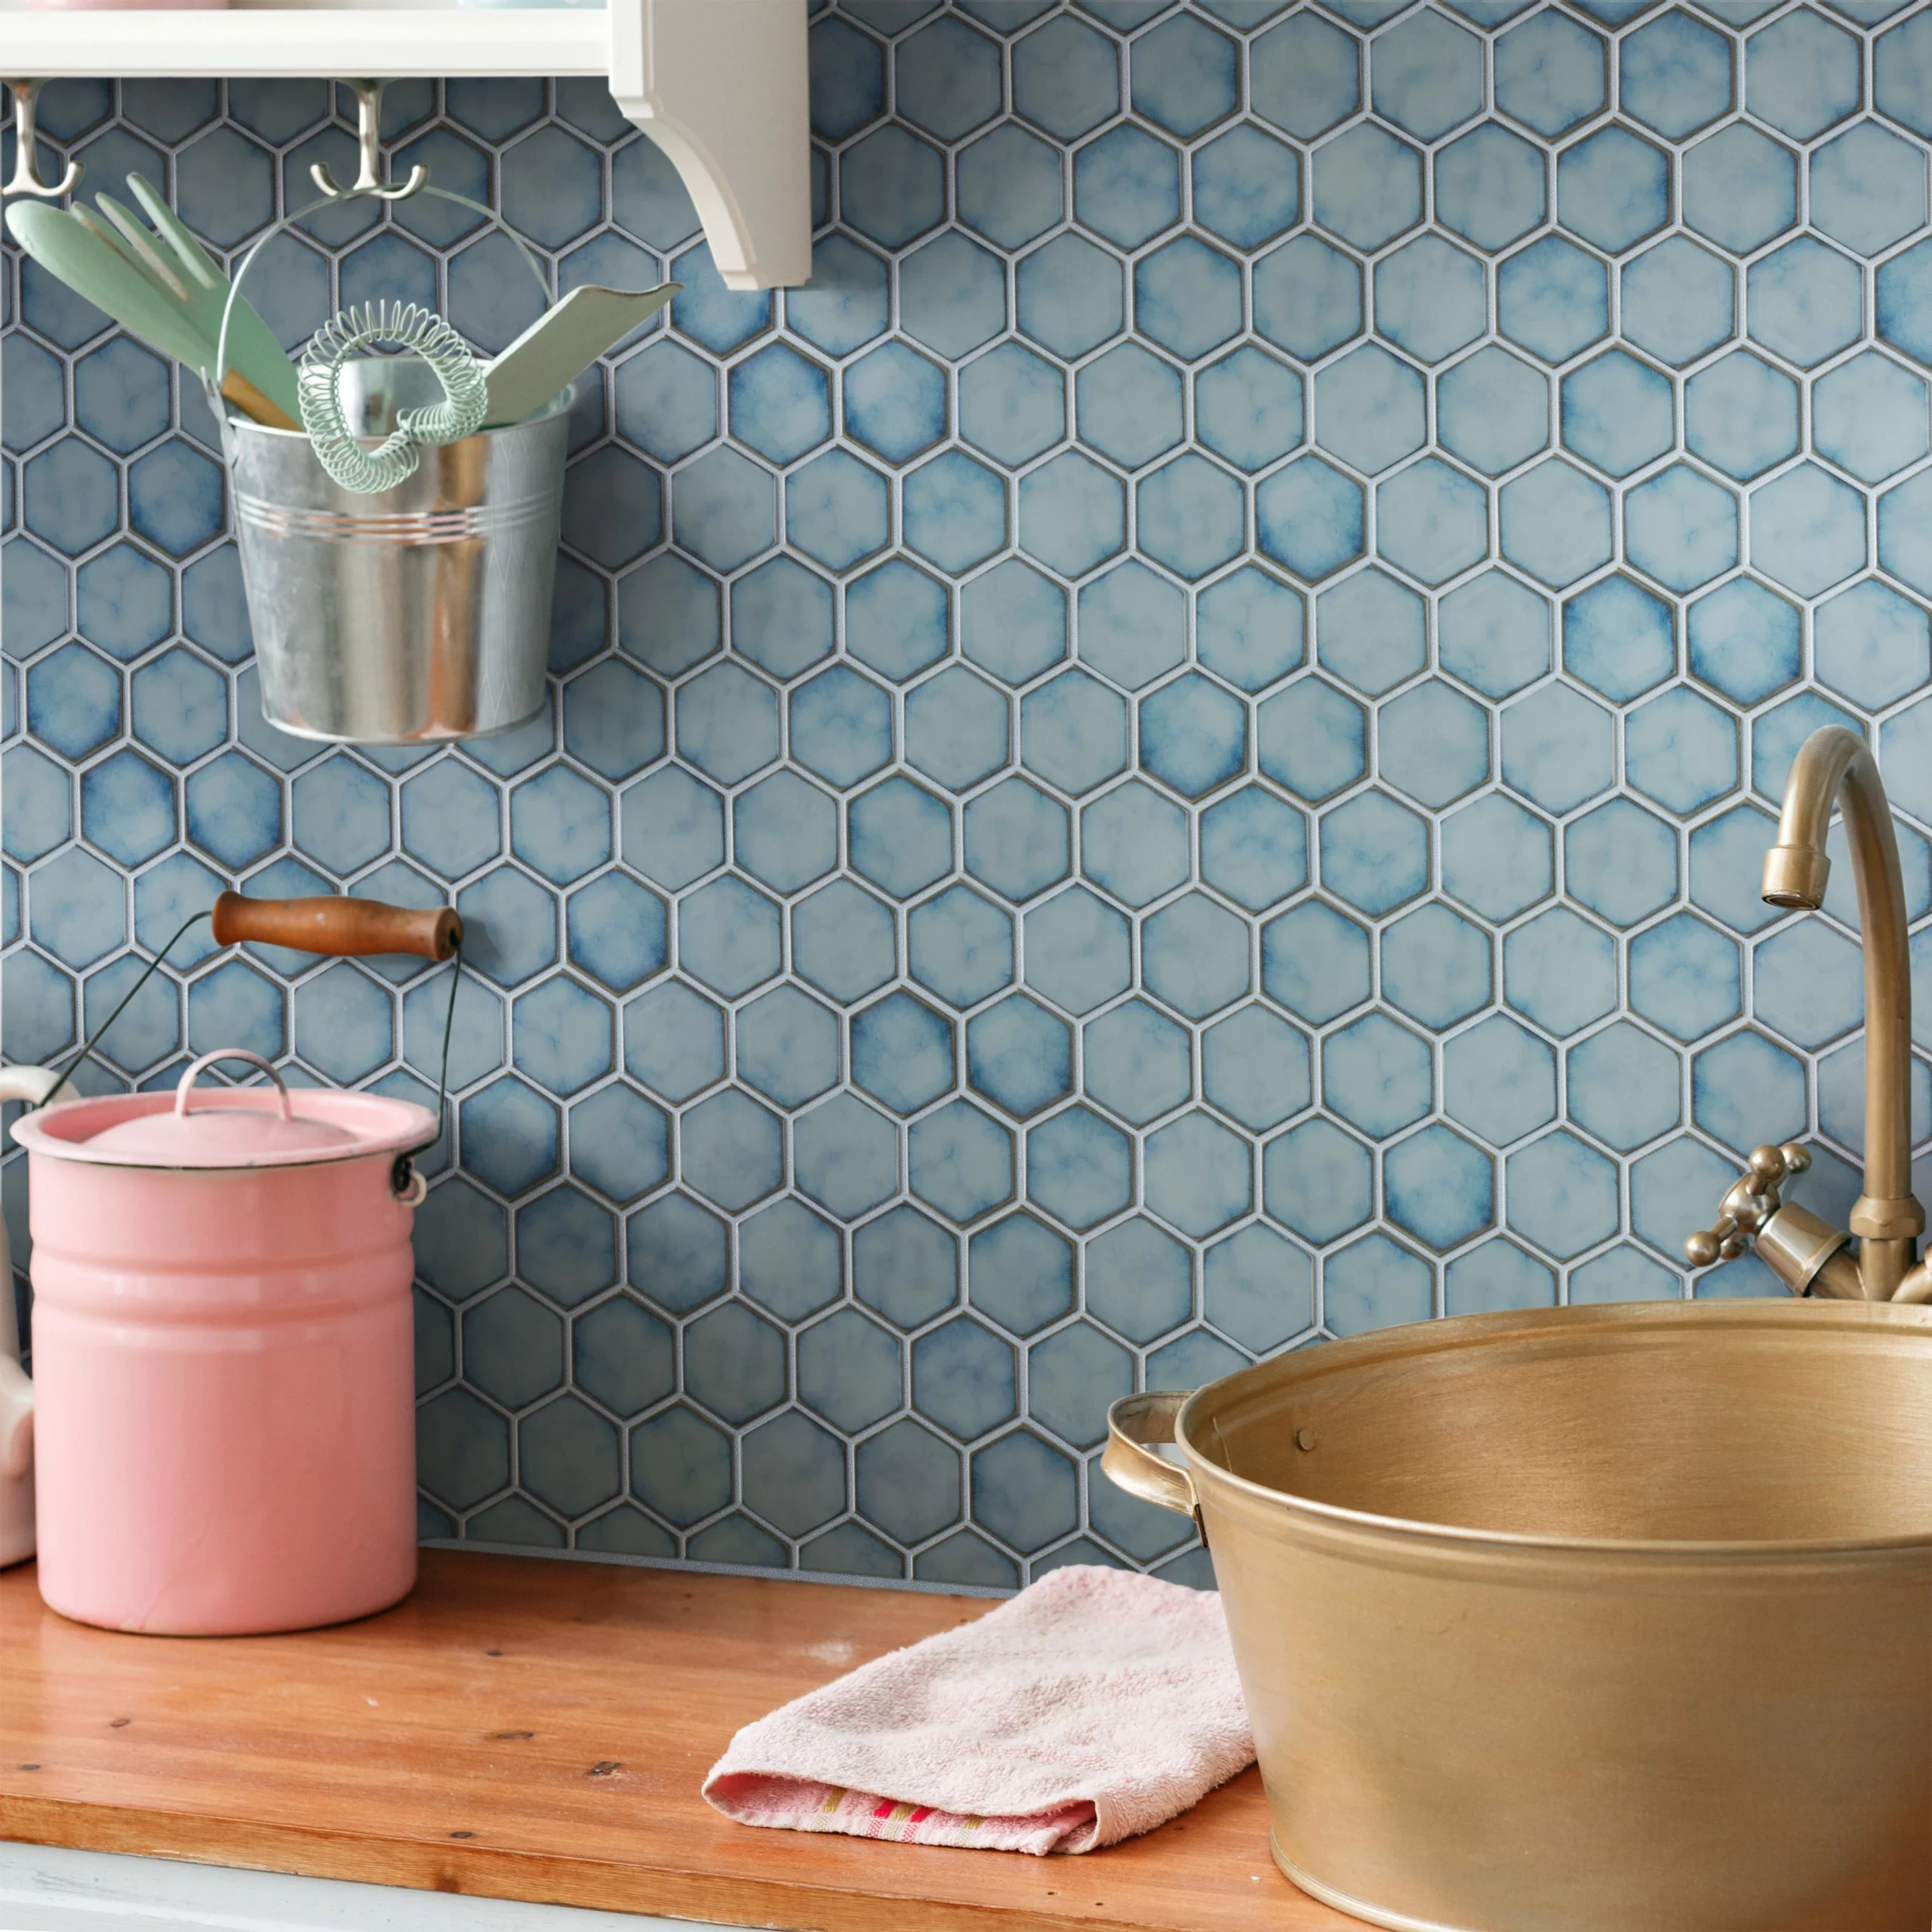 Pay Tribute to the Ocean with this Nautical Tile